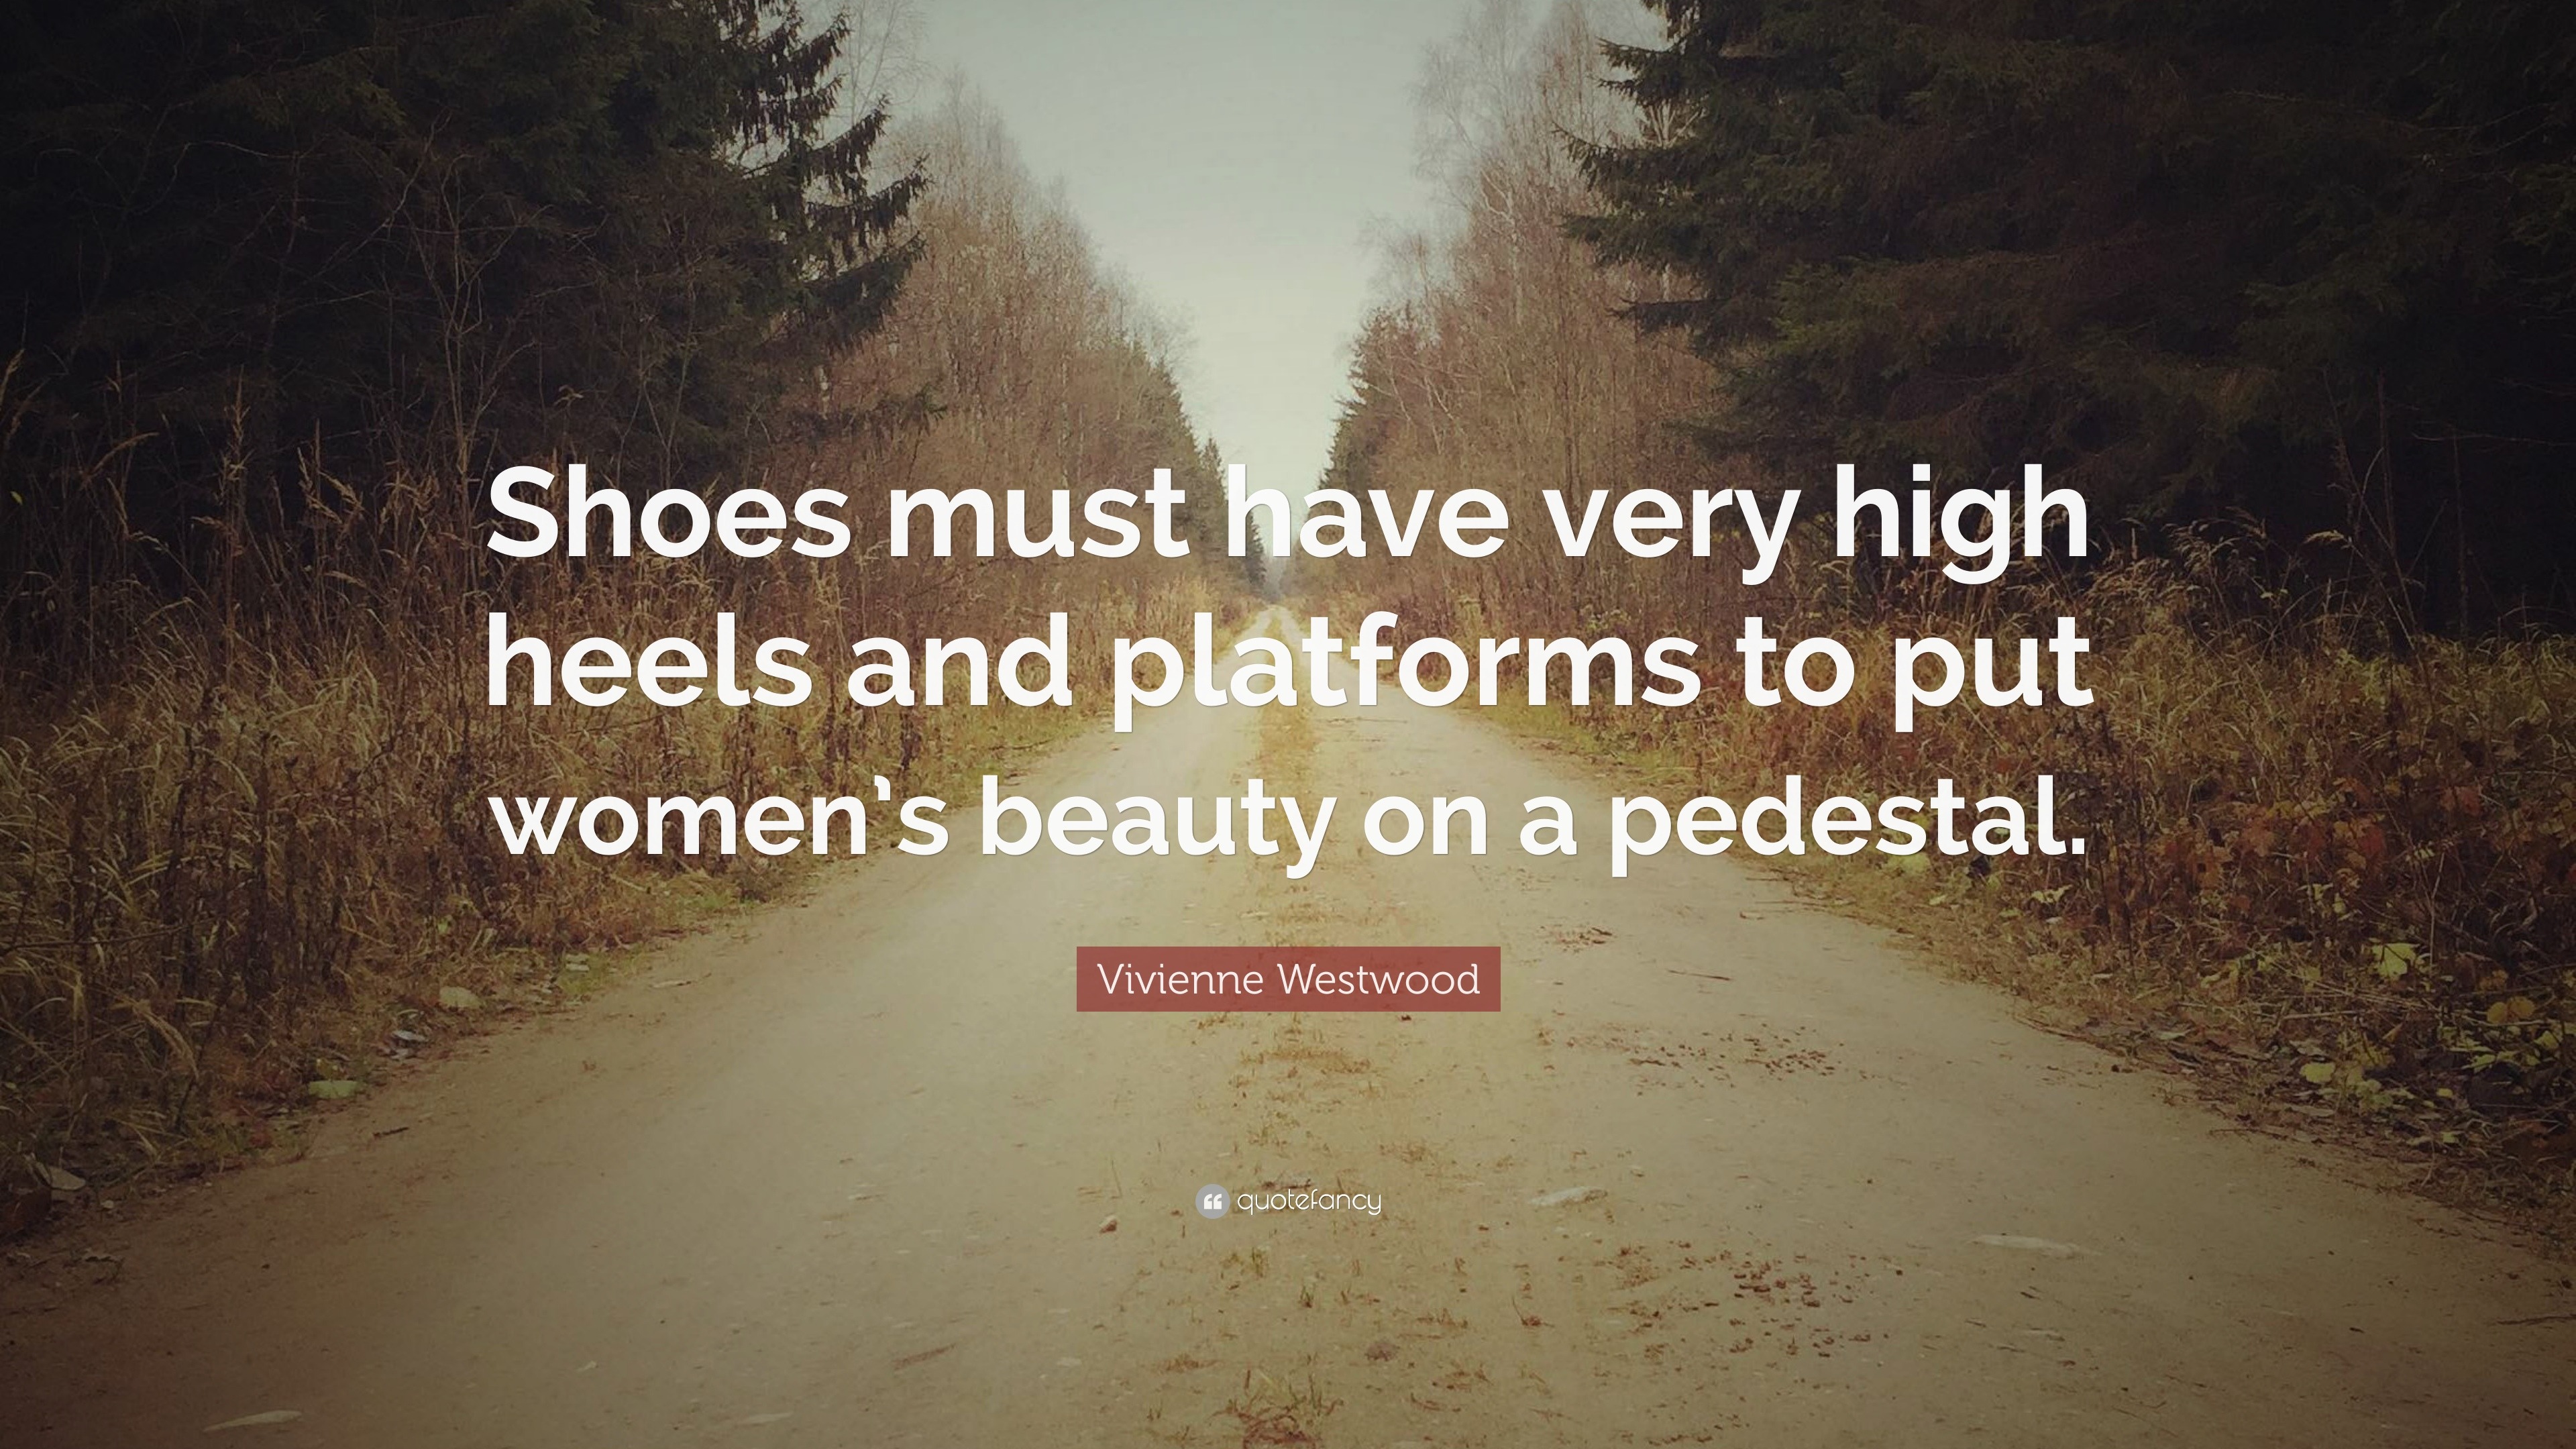 I Love My Shoes Quotes. QuotesGram